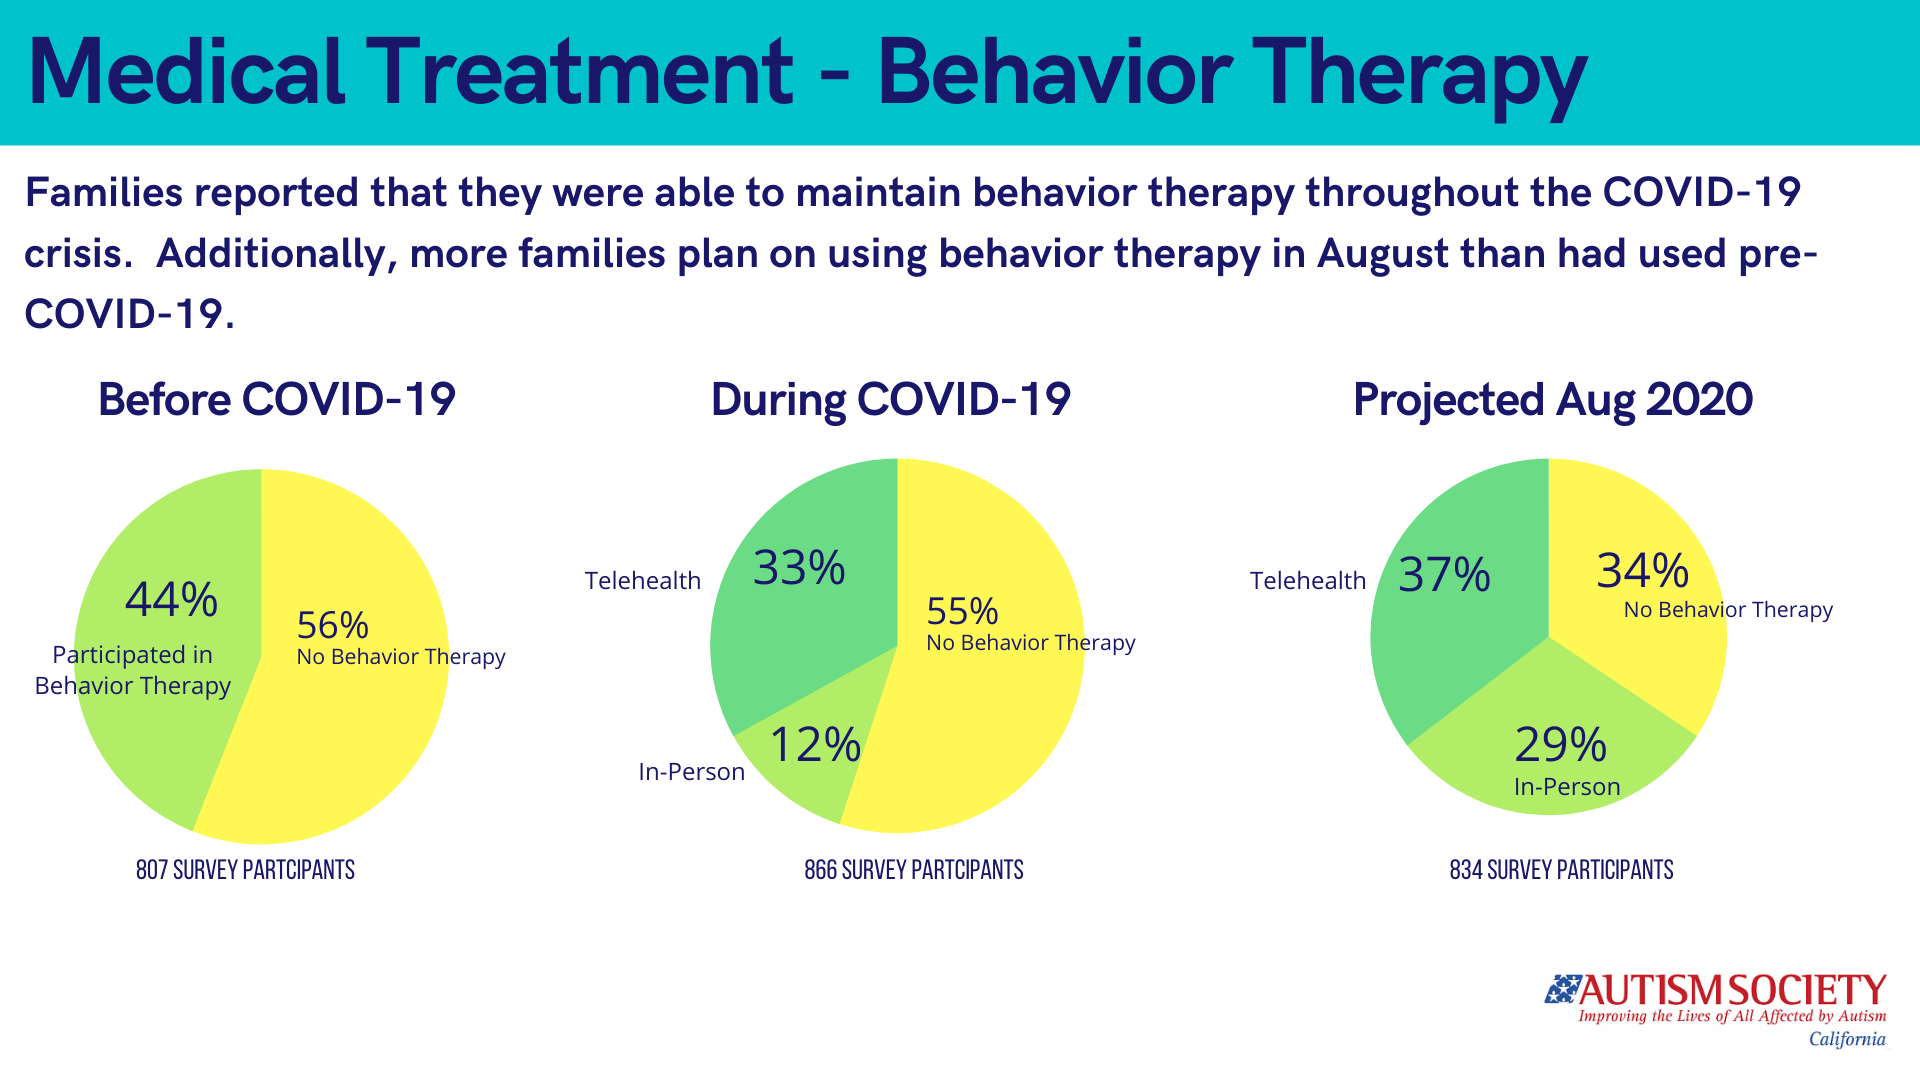 Medical treatment and behavior therapy